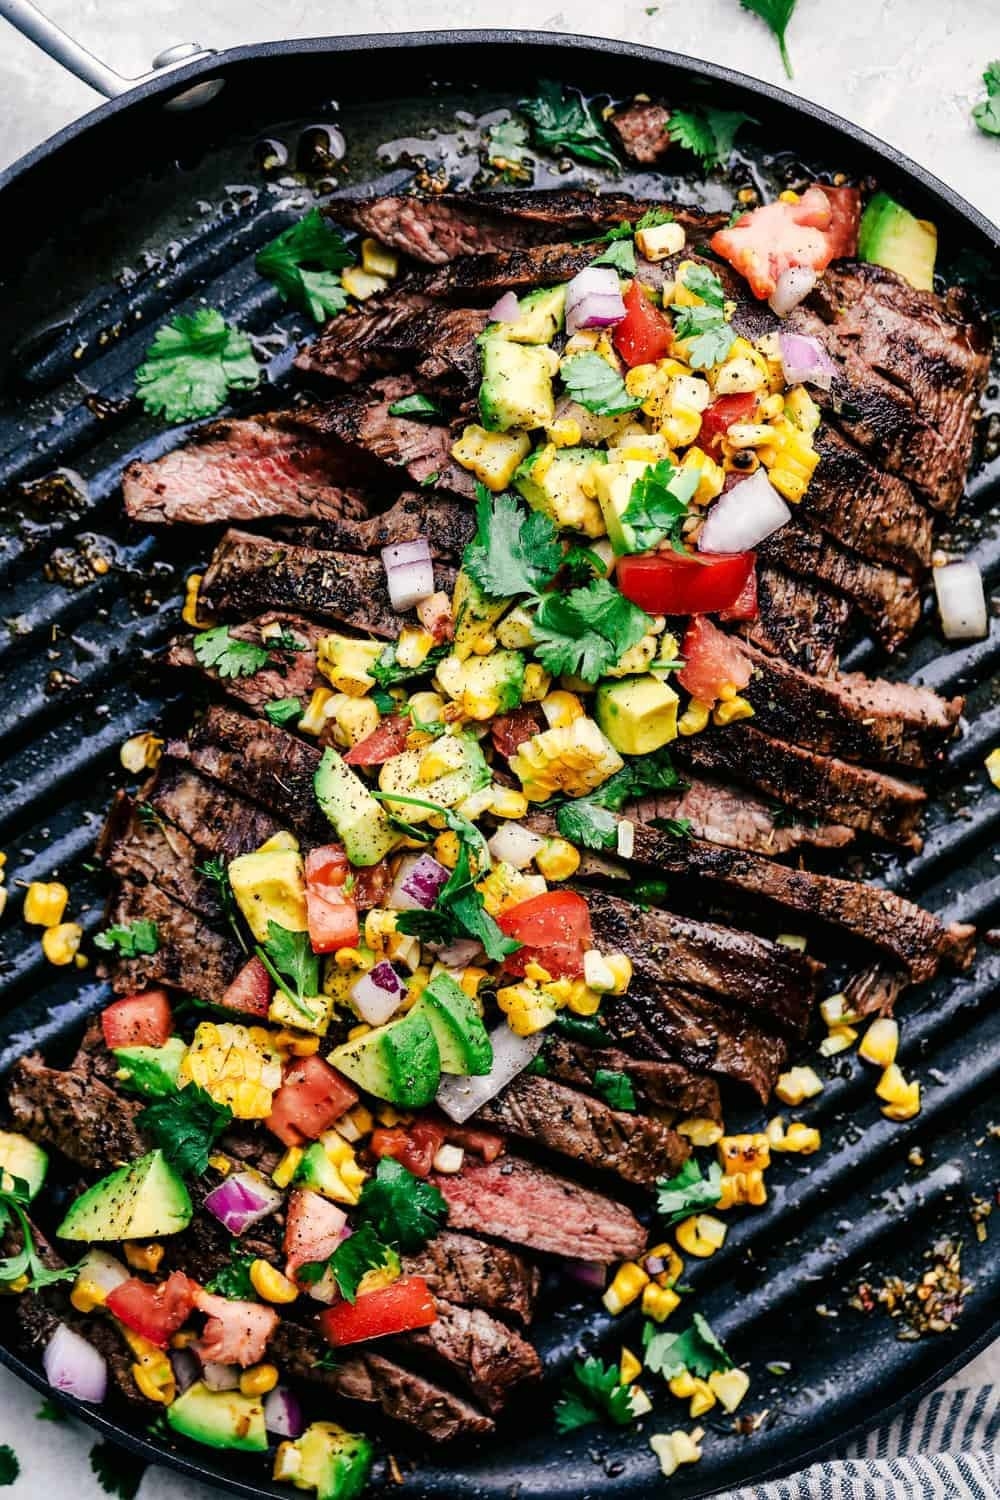 Sliced flank steak on a grill topped with avocado, red onion, tomato, corn, and cilantro slaw.